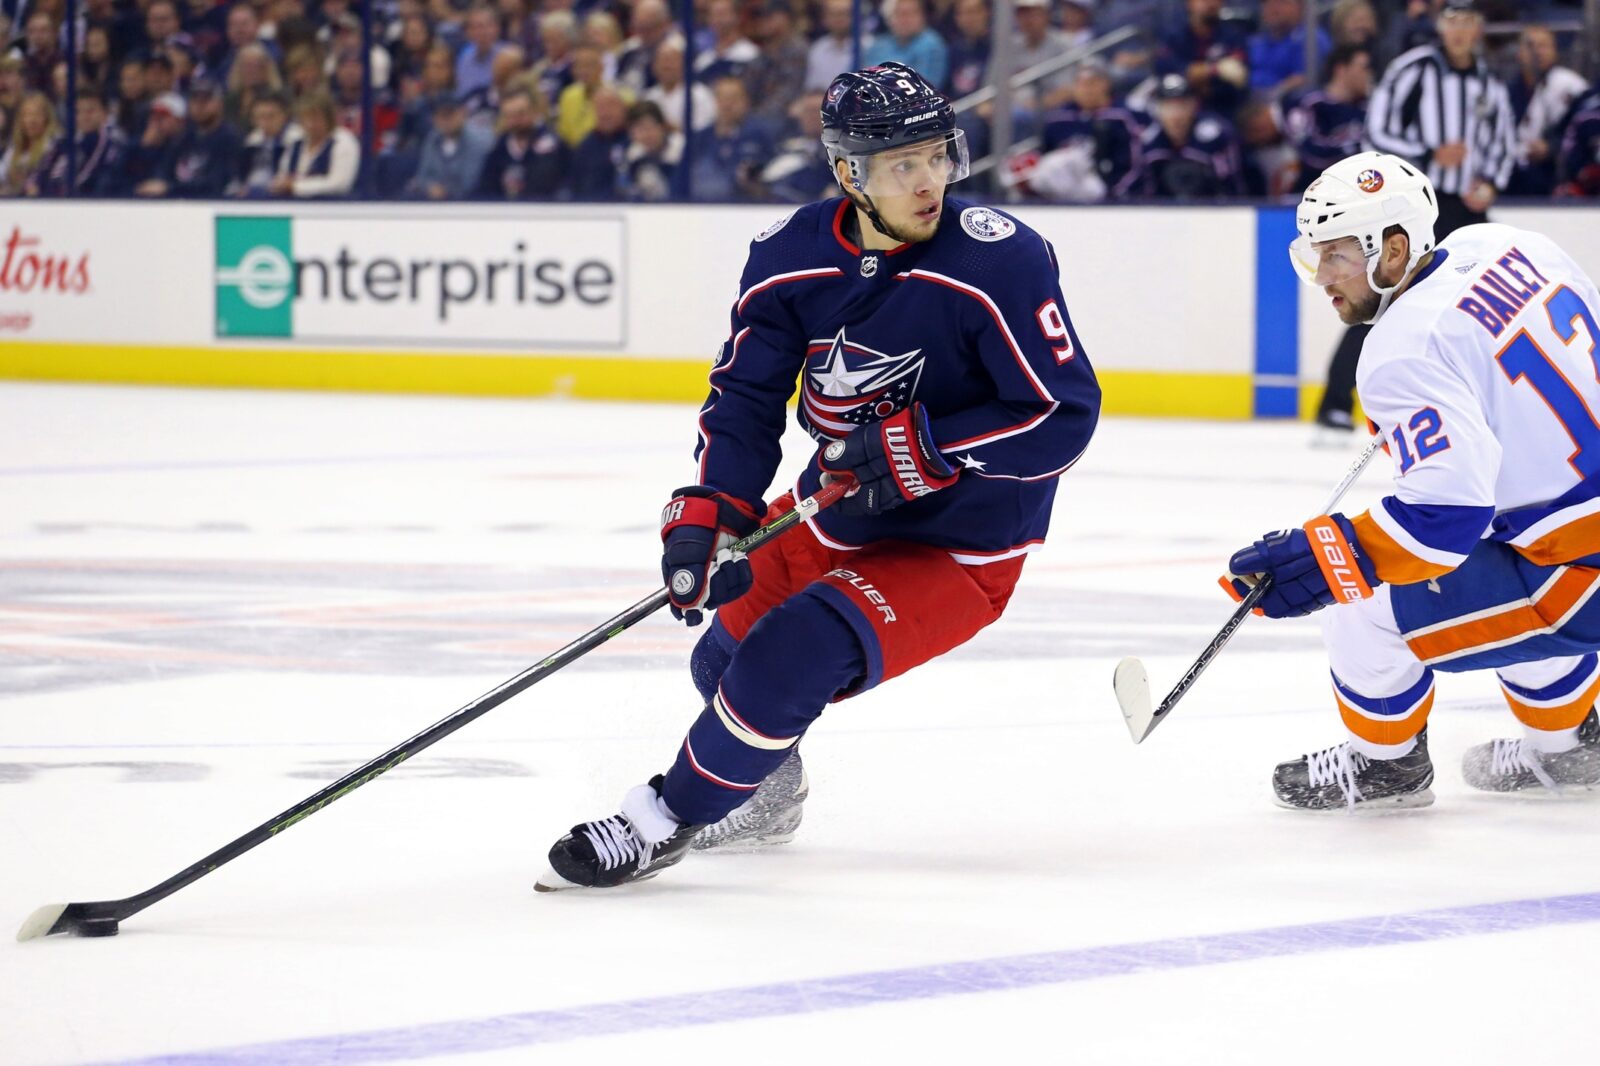 Projecting a possible Artemi Panarin contract, and his impact on the